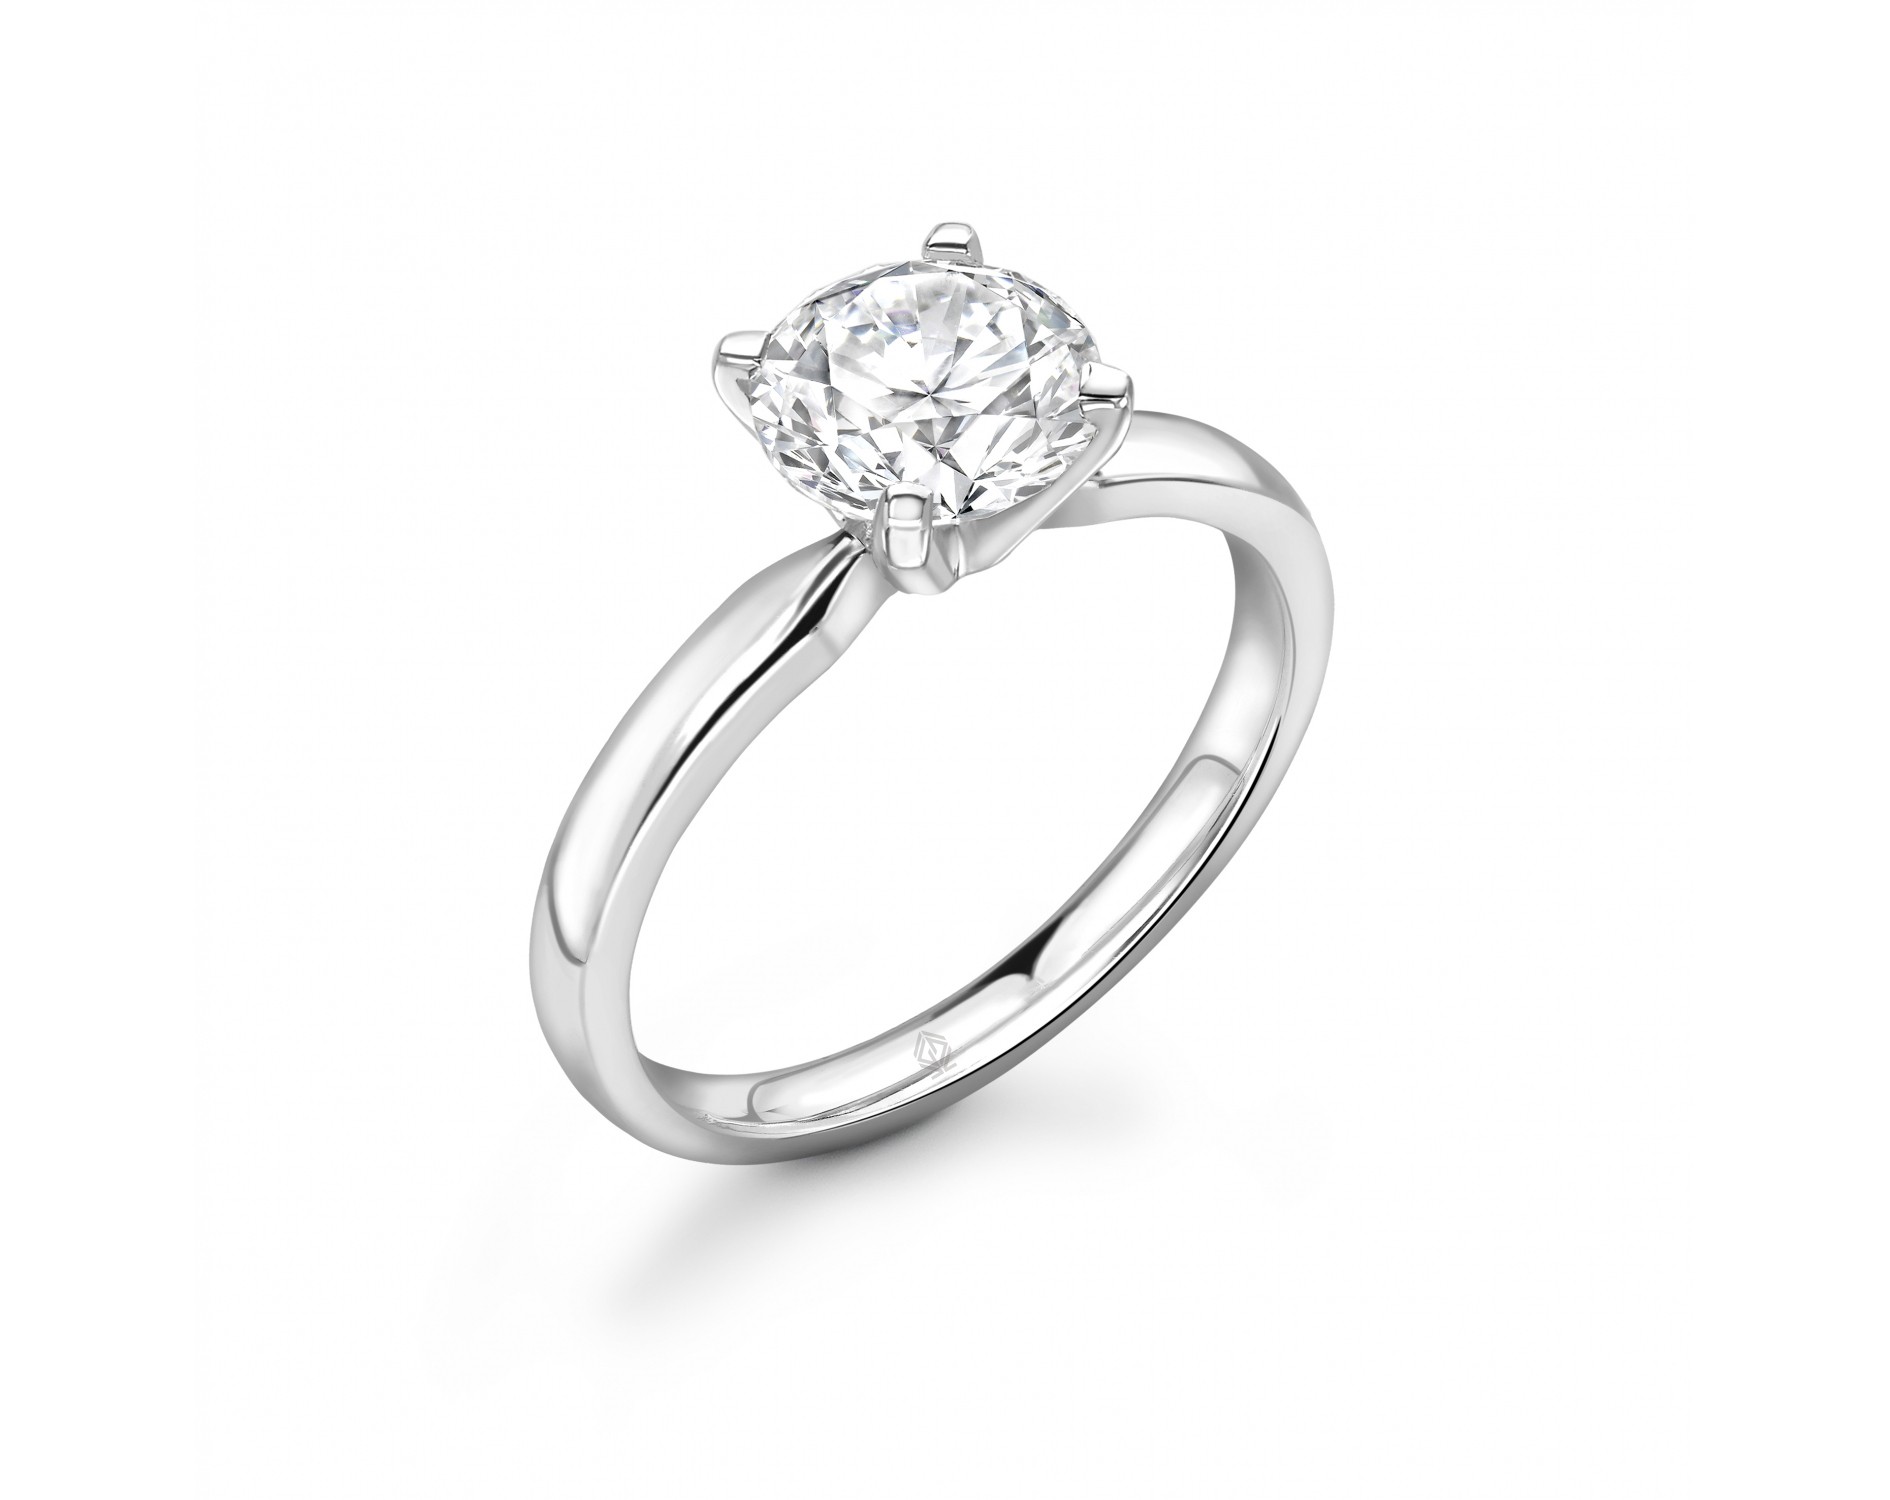 18K WHITE GOLD 4 PRONGS SOLITAIRE ROUND CUT DIAMOND ENGAGEMENT RING